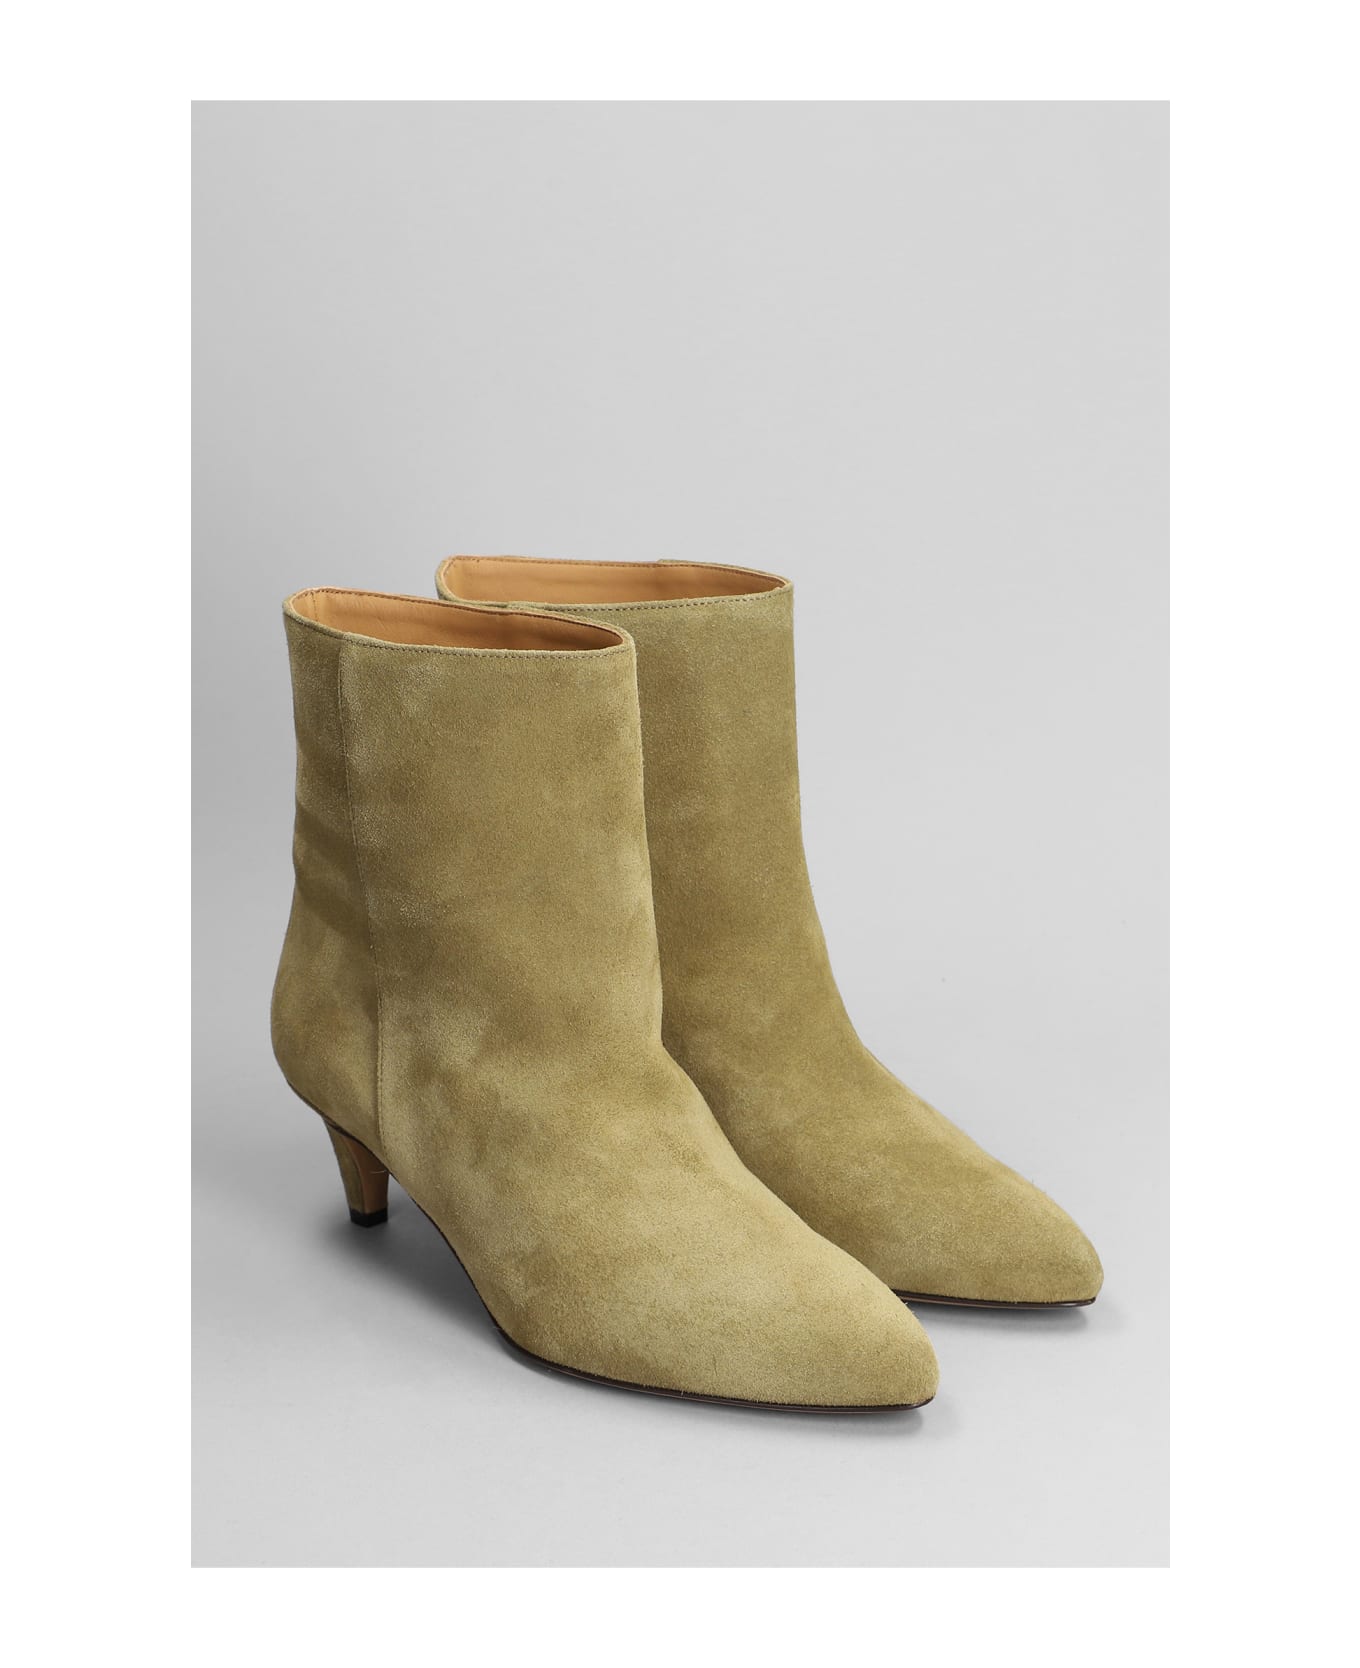 Isabel Marant Daxi Low Heels Ankle Boots In Taupe Suede - taupe ブーツ